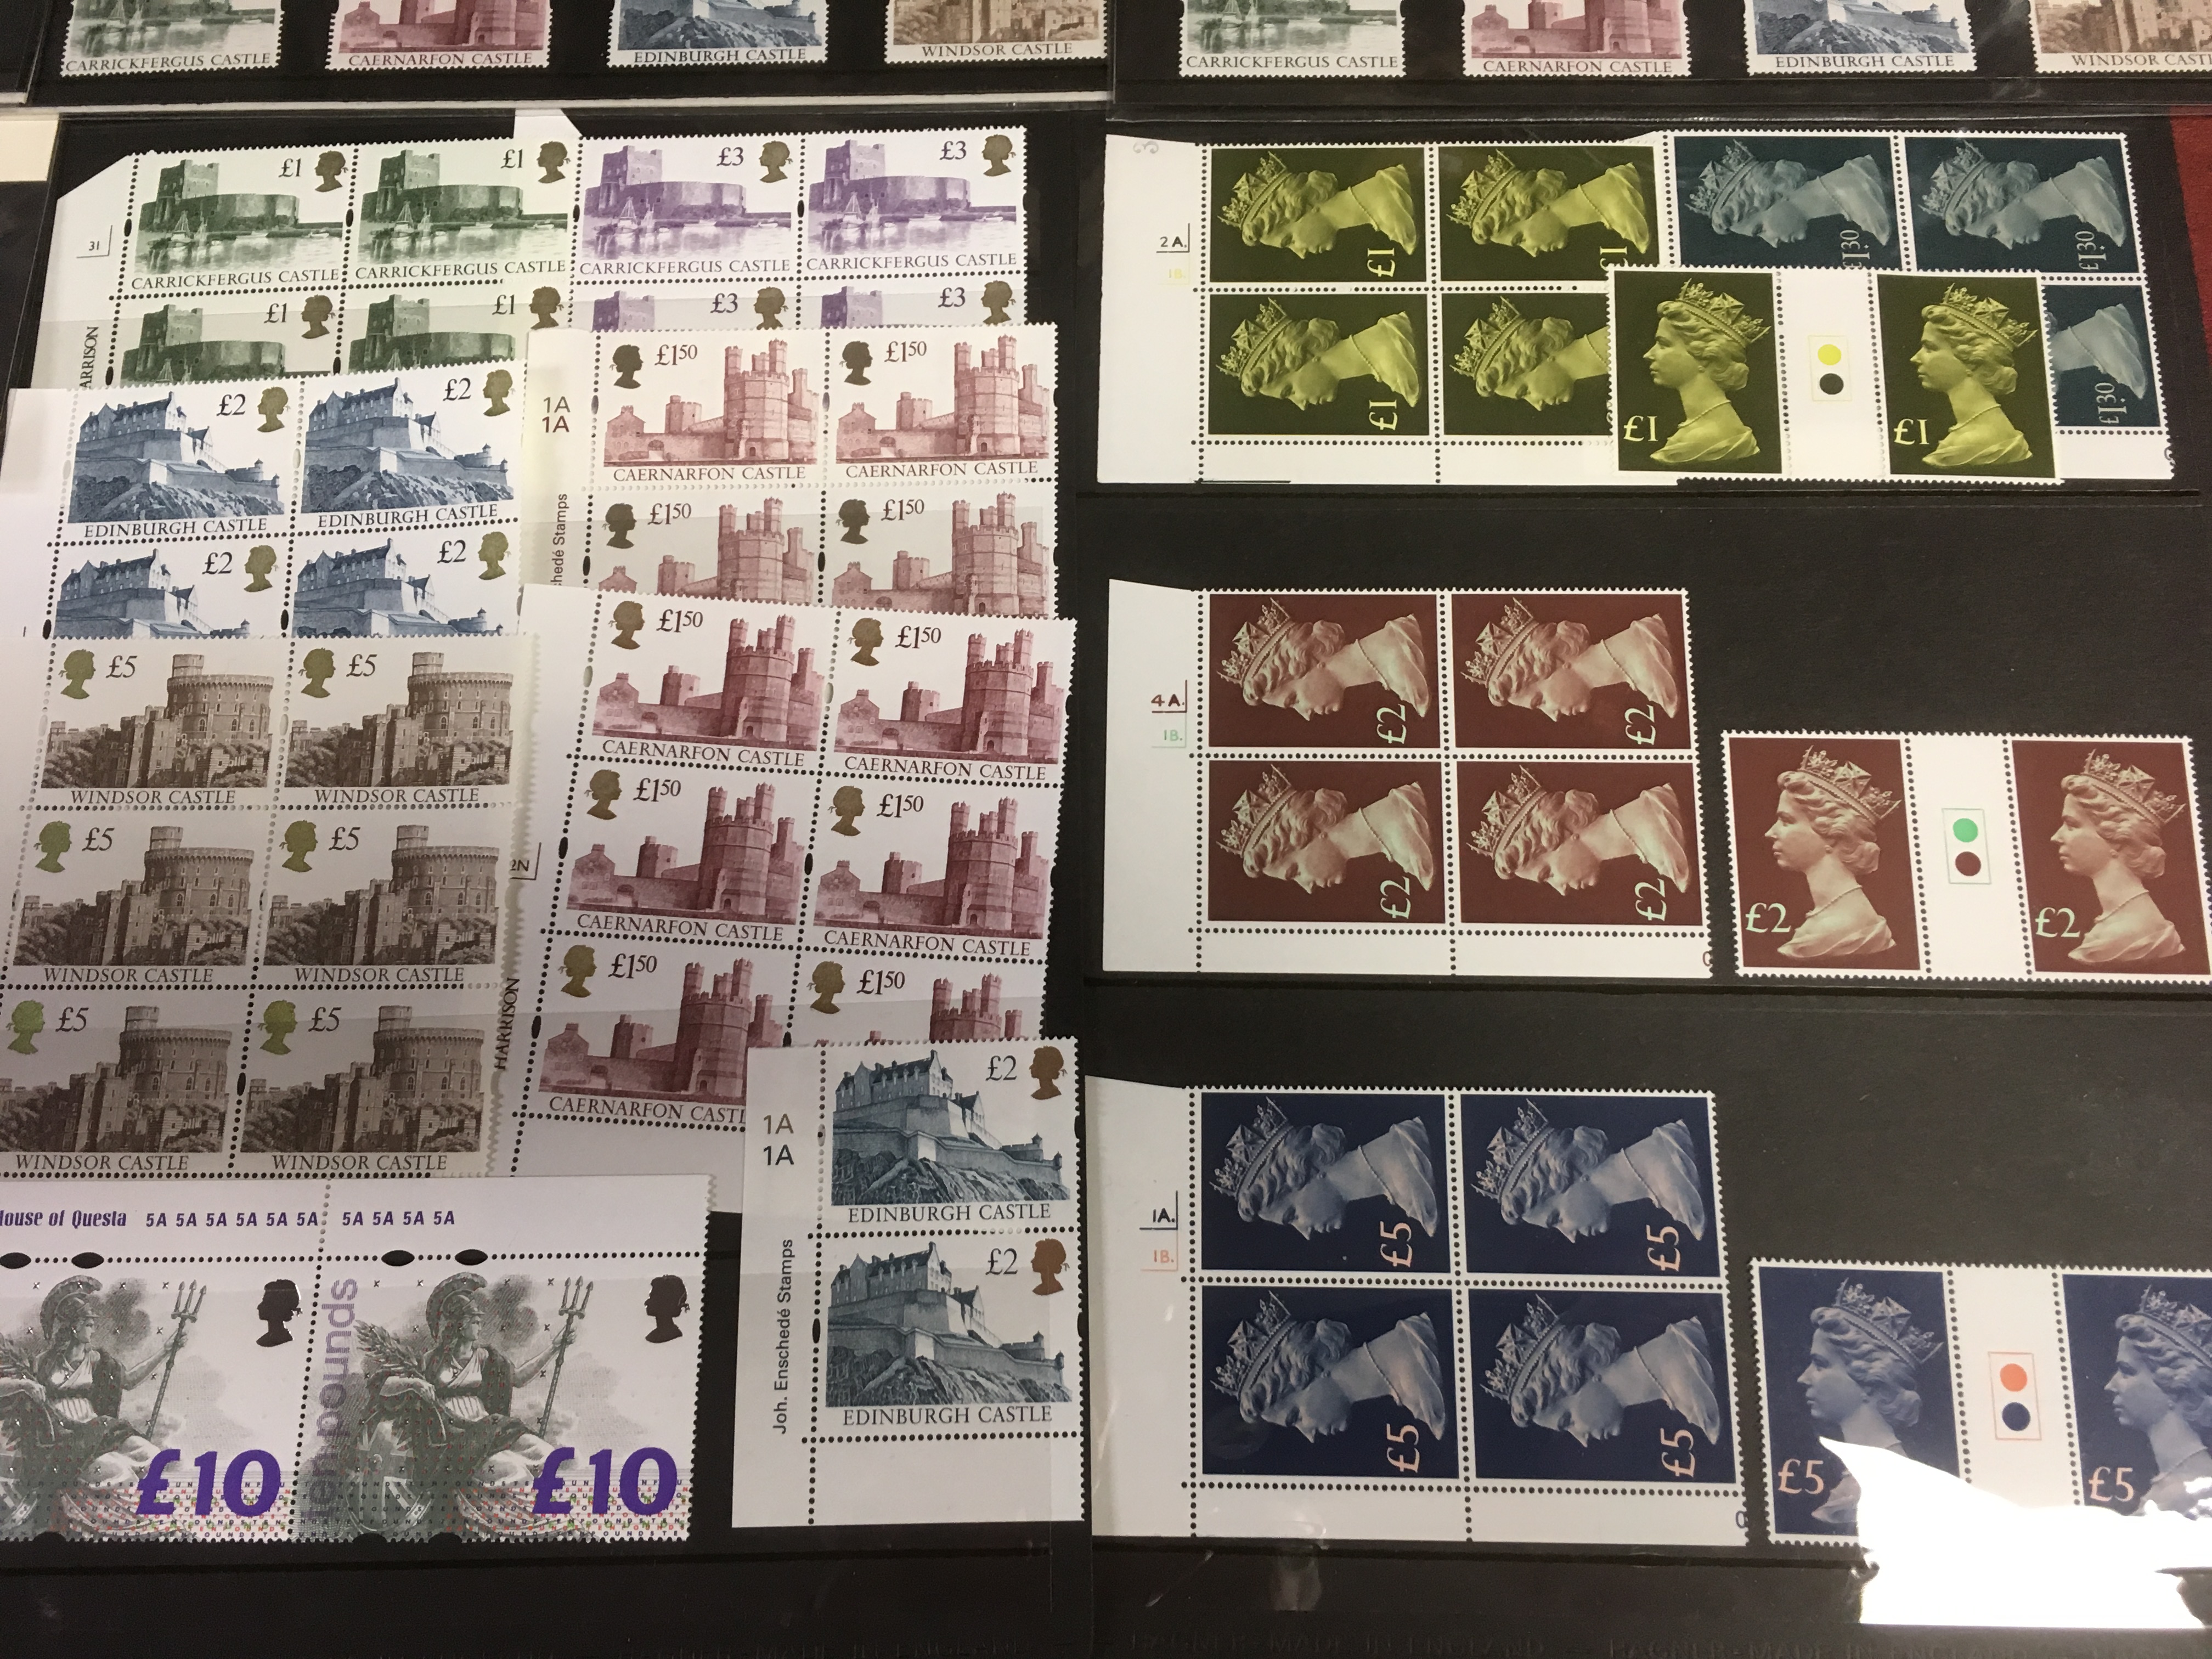 GB: 1977-95 MACHIN AND CASTLE HIGH VALUES MINT MULTIPLES AND PRESENTATION PACKS, FACE APPROX. - Image 2 of 3